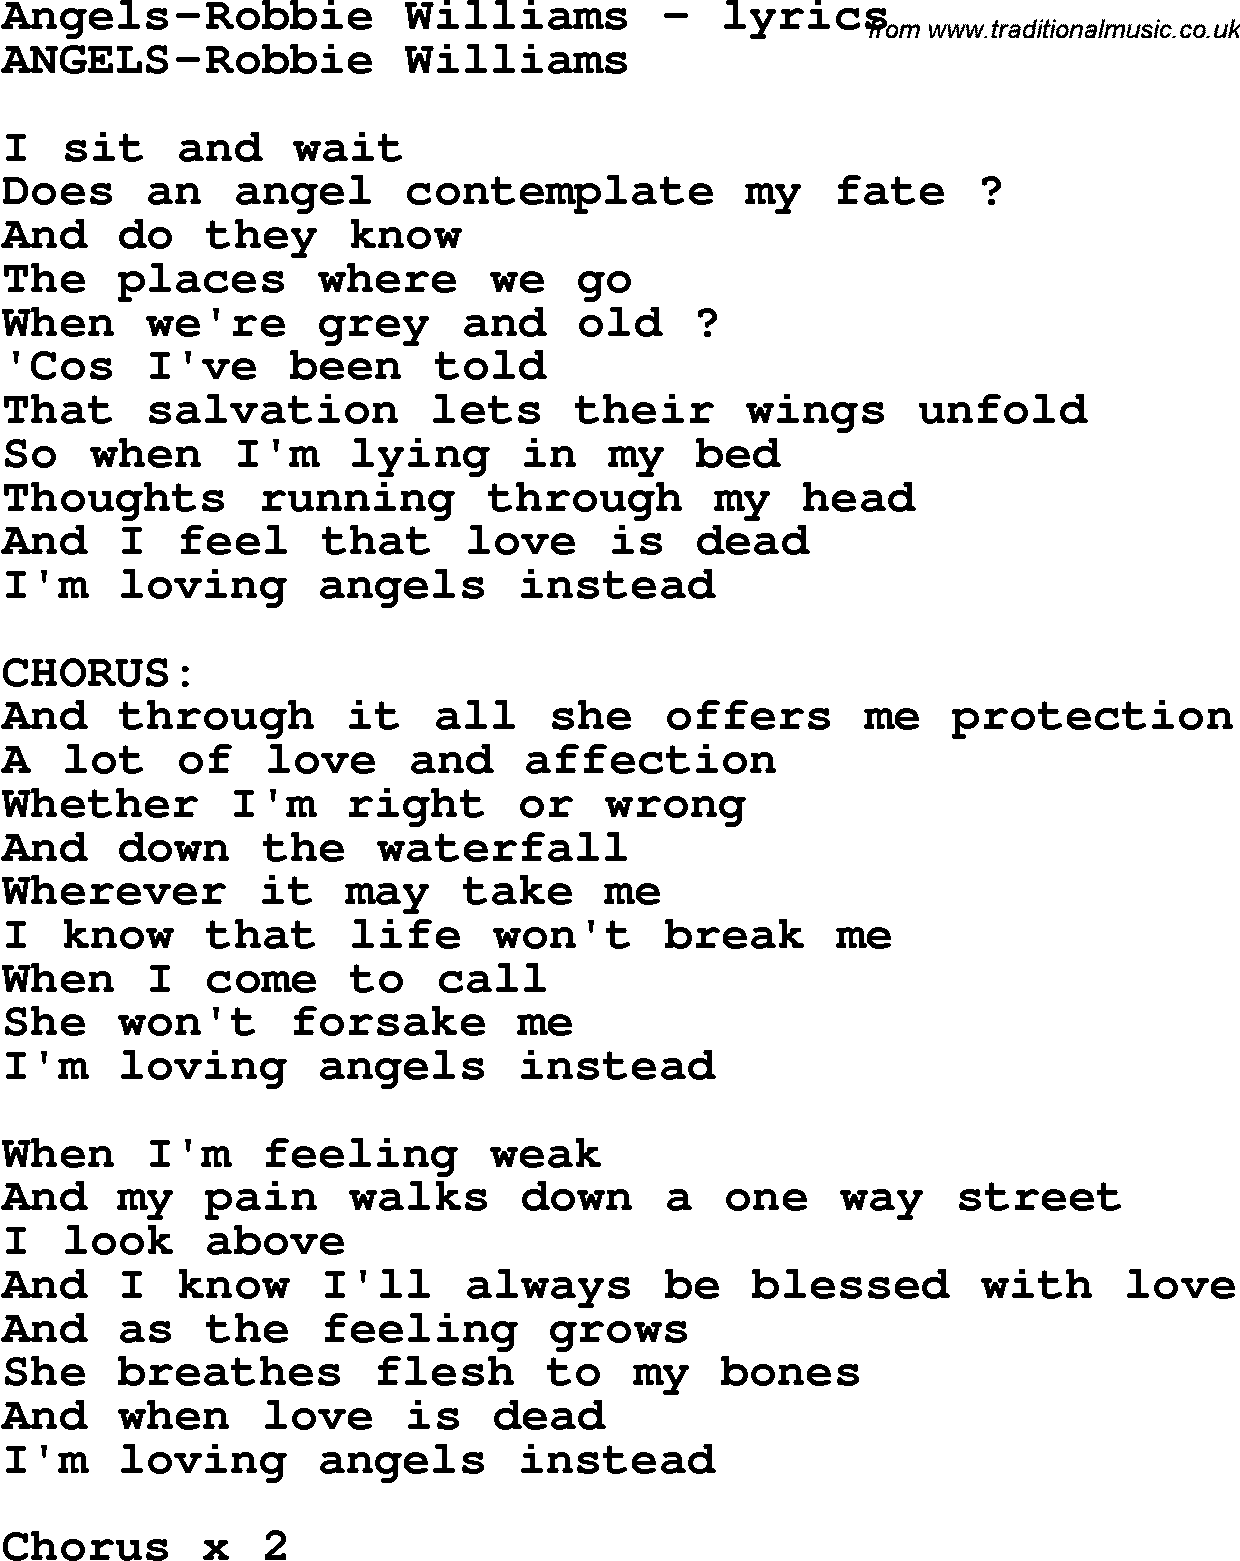 Love Song Lyrics for: Angels-Robbie Williams